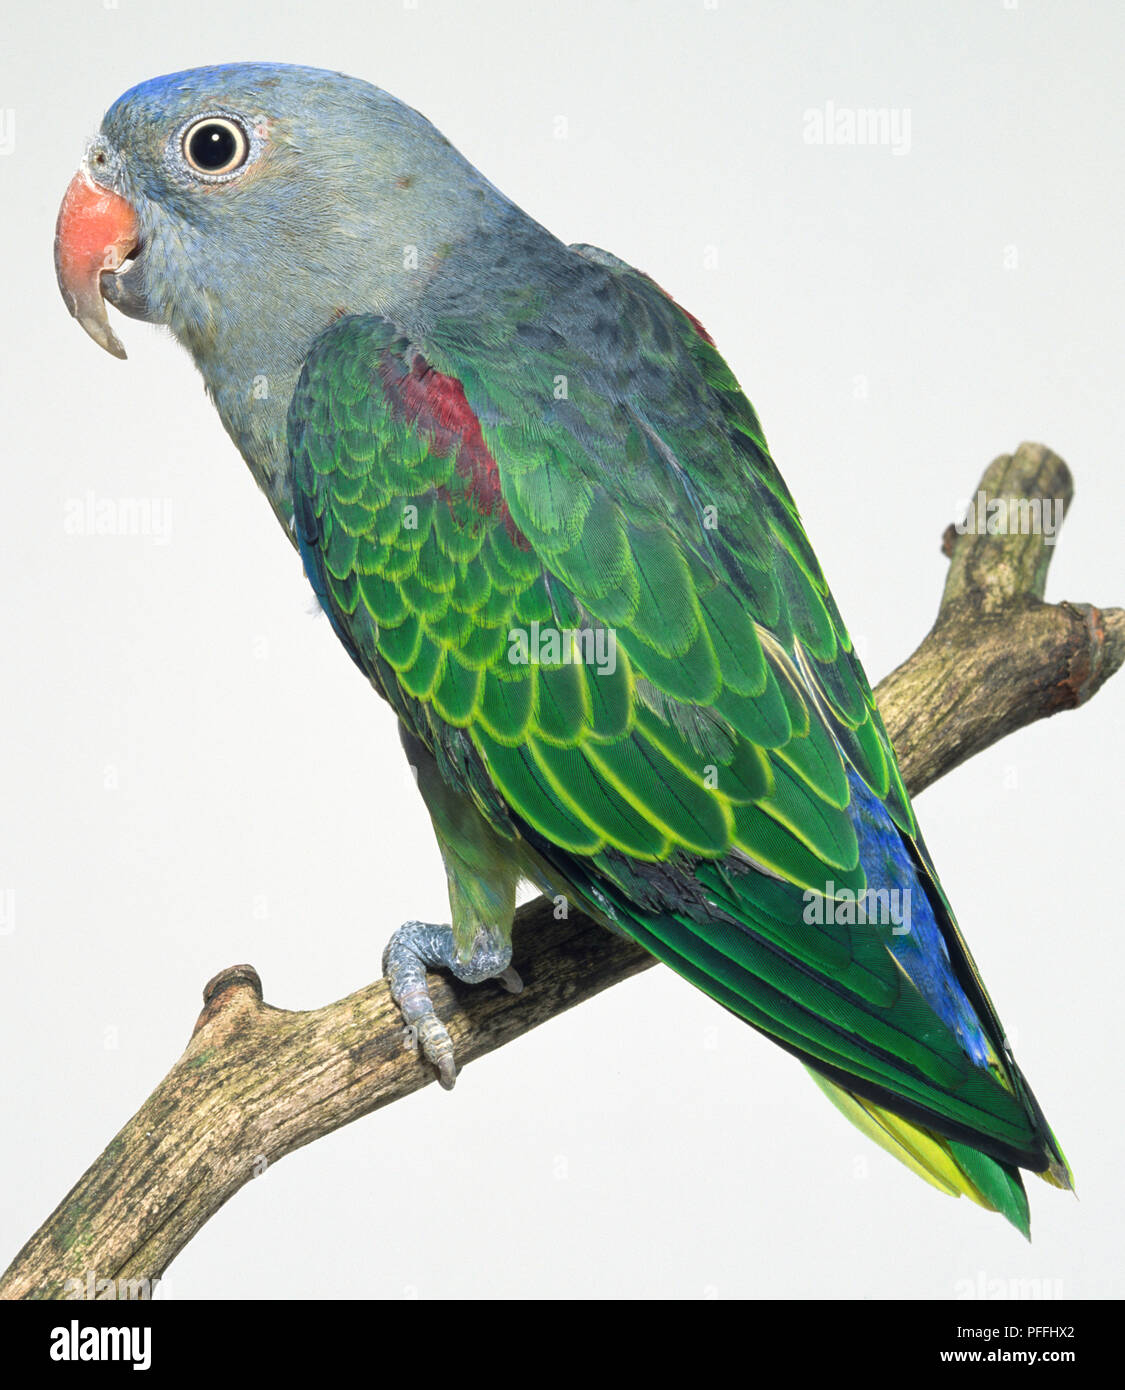 Rear view of a Blue-Rumped Parrot, perching on a branch, with head in profile, showing red bill, greyish-blue head, olive-green wing plumage with greenish-yellow edging, upper tail-coverts deep blue, and grey feet and legs. Stock Photo